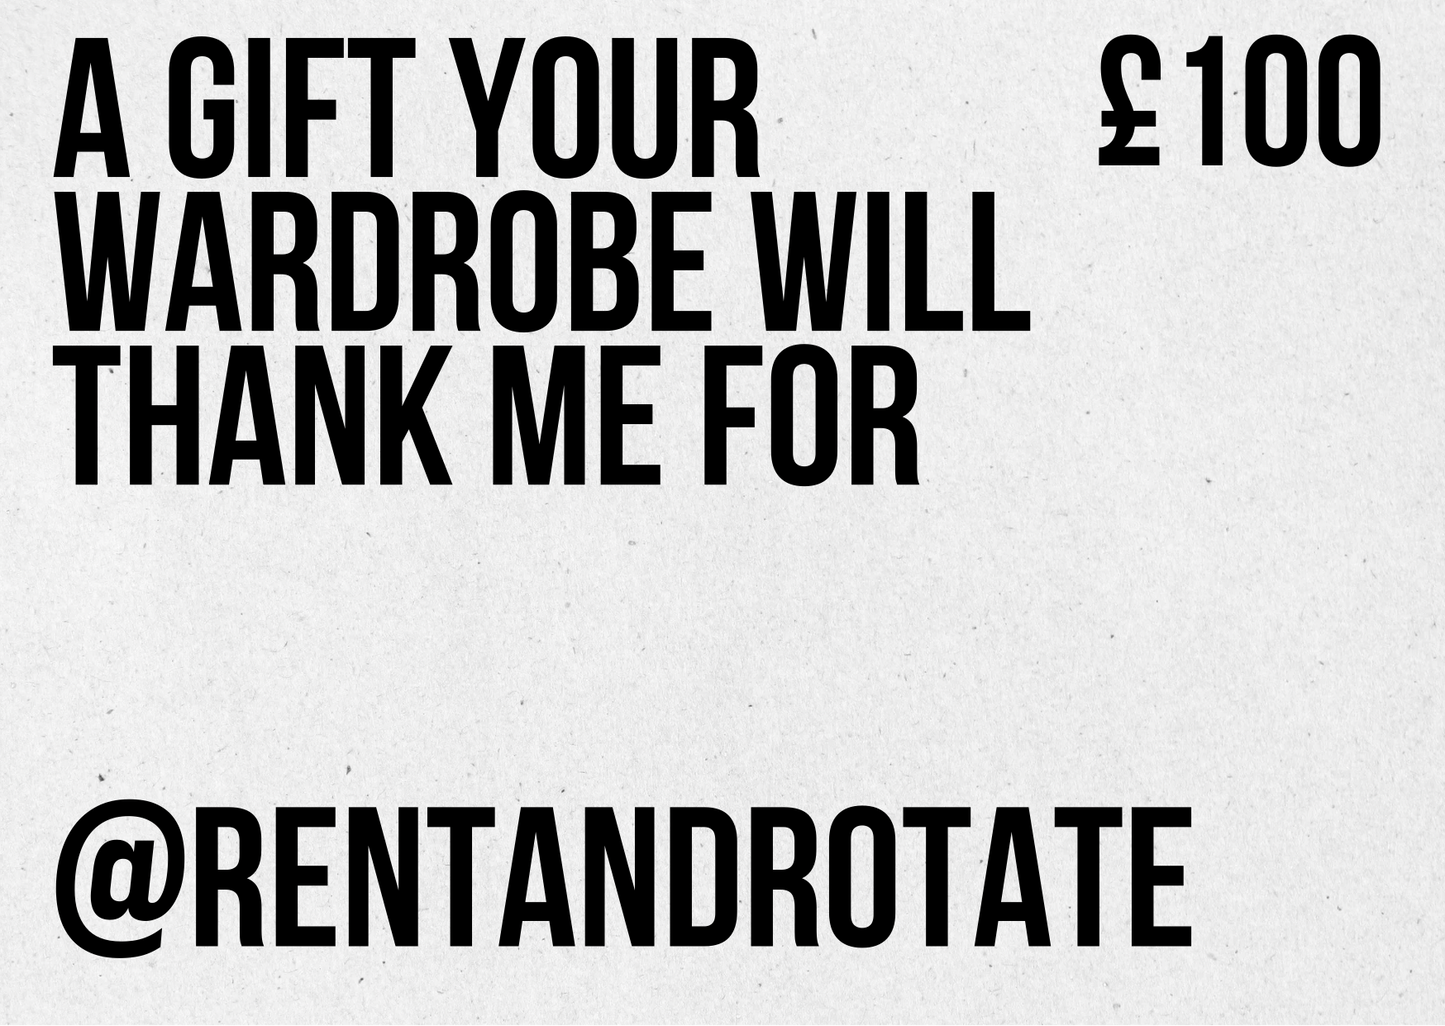 Rent and Rotate Gift Card